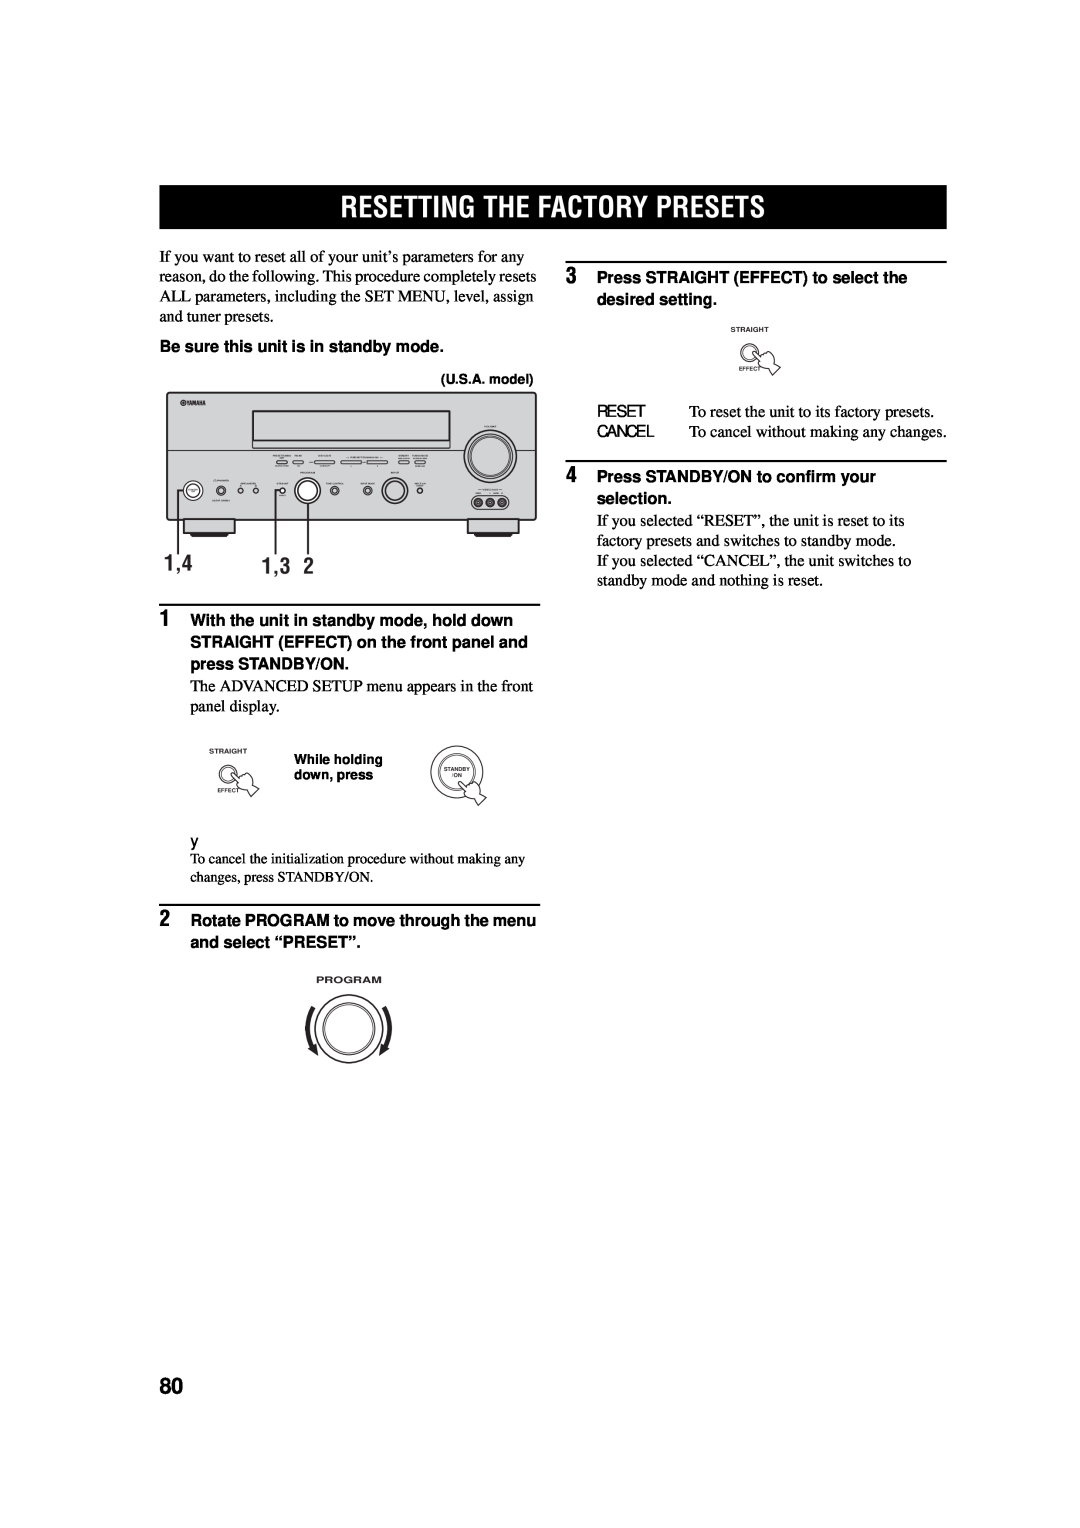 Yamaha AV Receiver owner manual Resetting The Factory Presets, Be sure this unit is in standby mode 